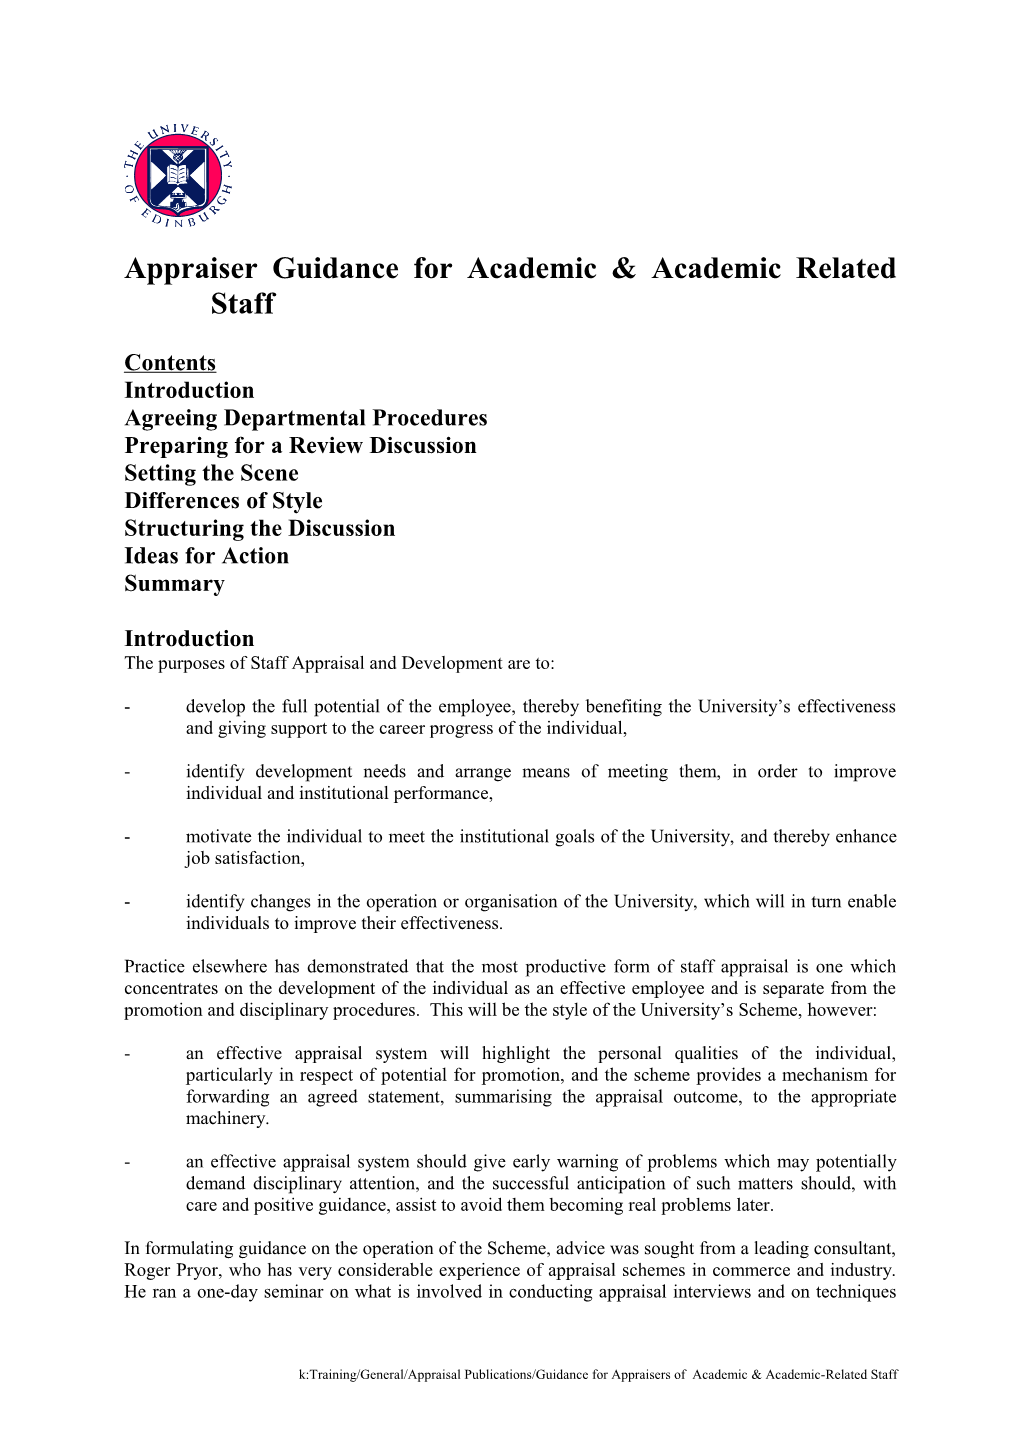 Appraiser Guidance for Academic & Academic Related Staff